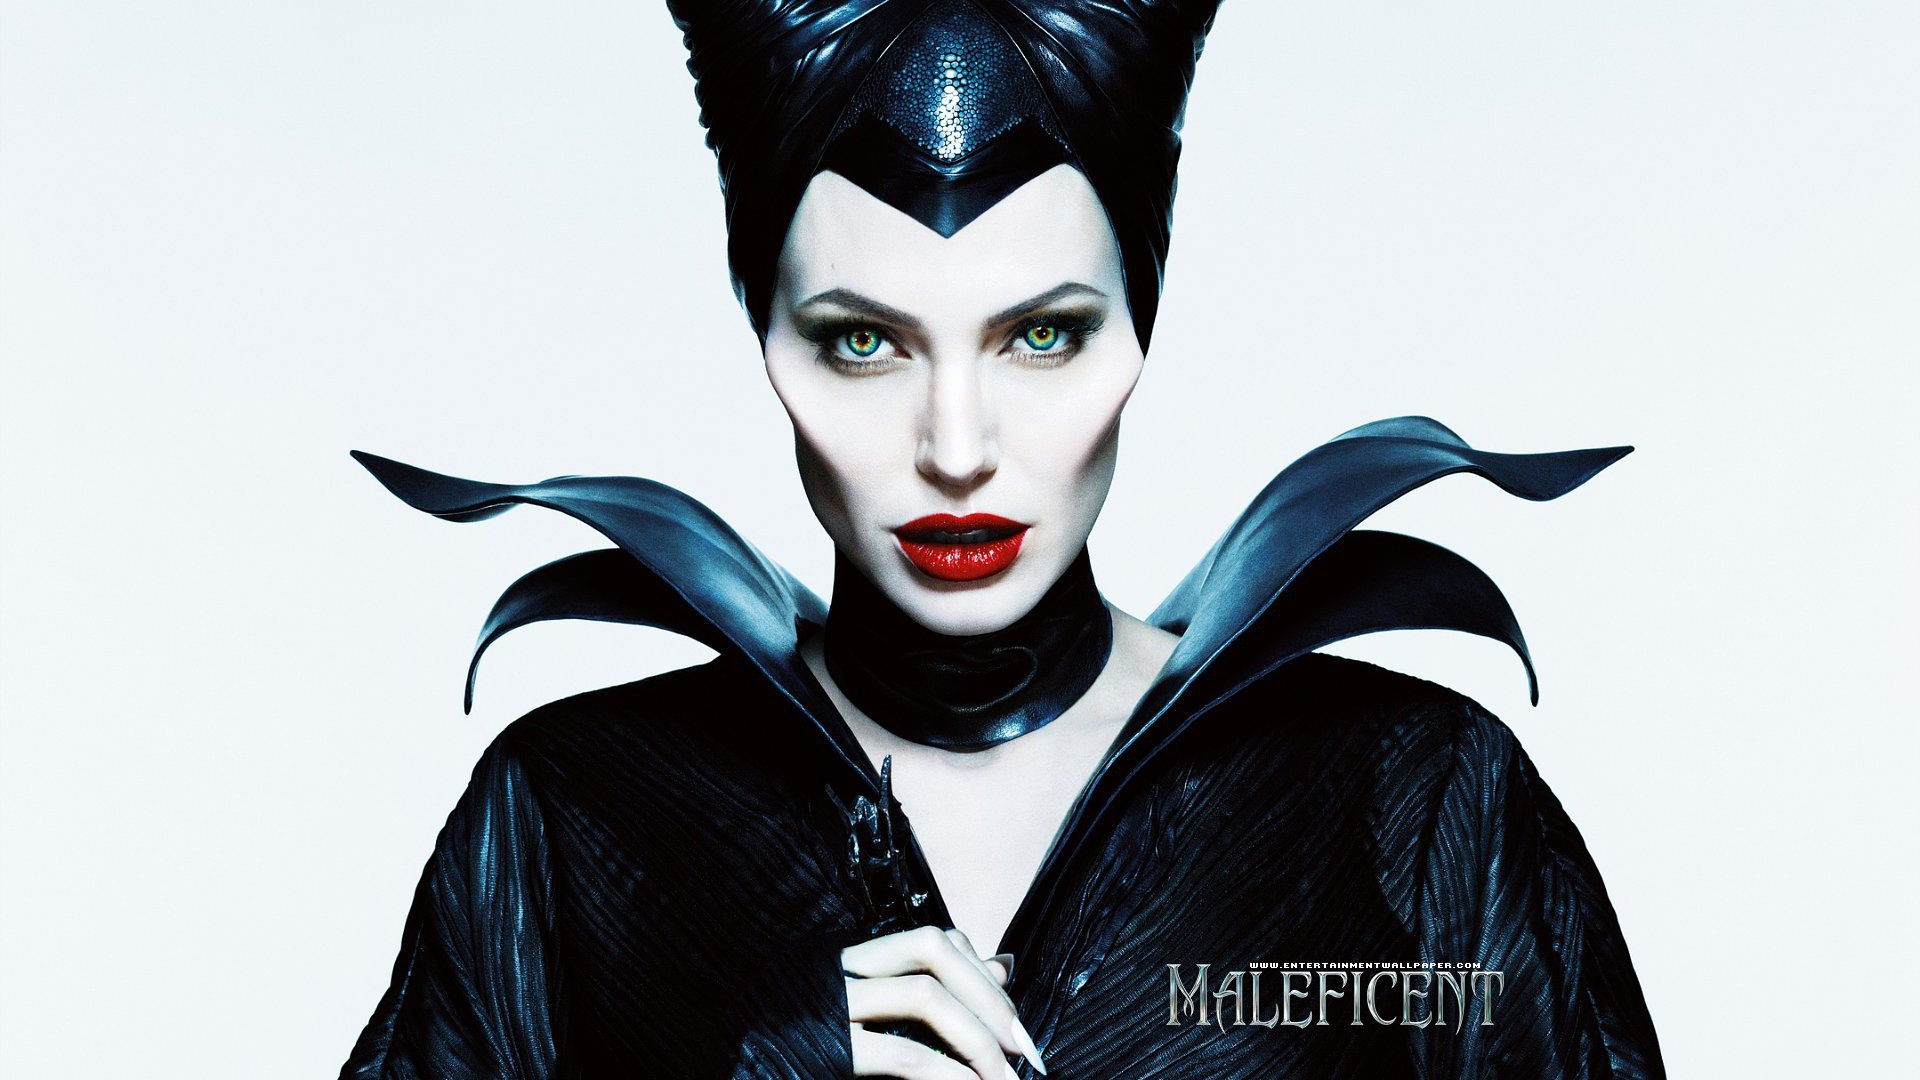 Maleficent 2014 HD movie wallpapers #13 - 1920x1080